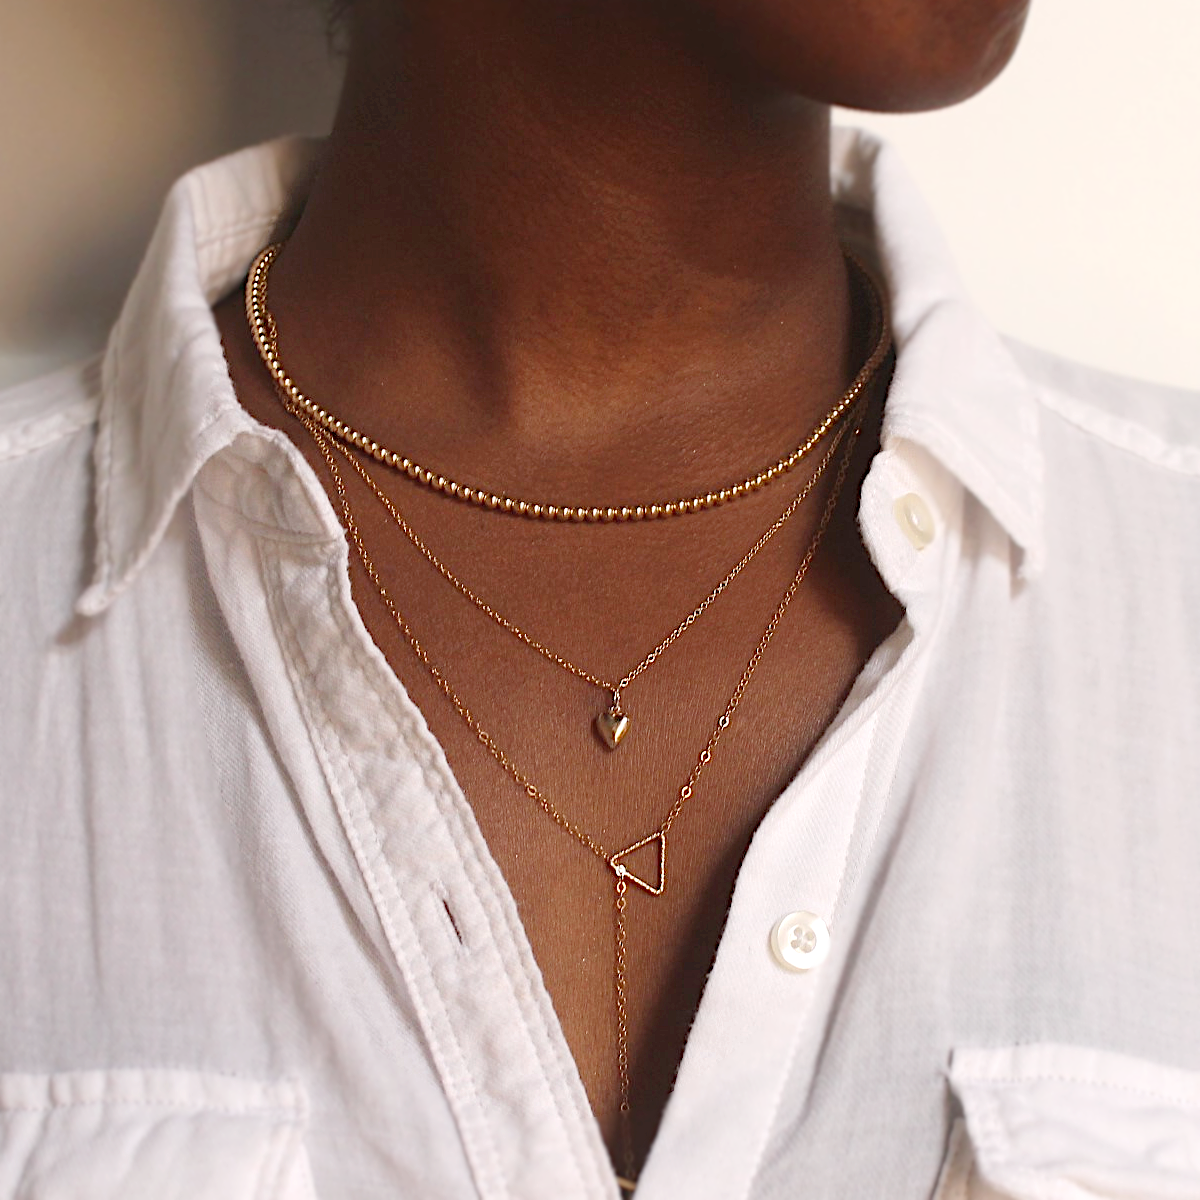 Model wearing gold beaded necklace, heart necklace and lariat necklace